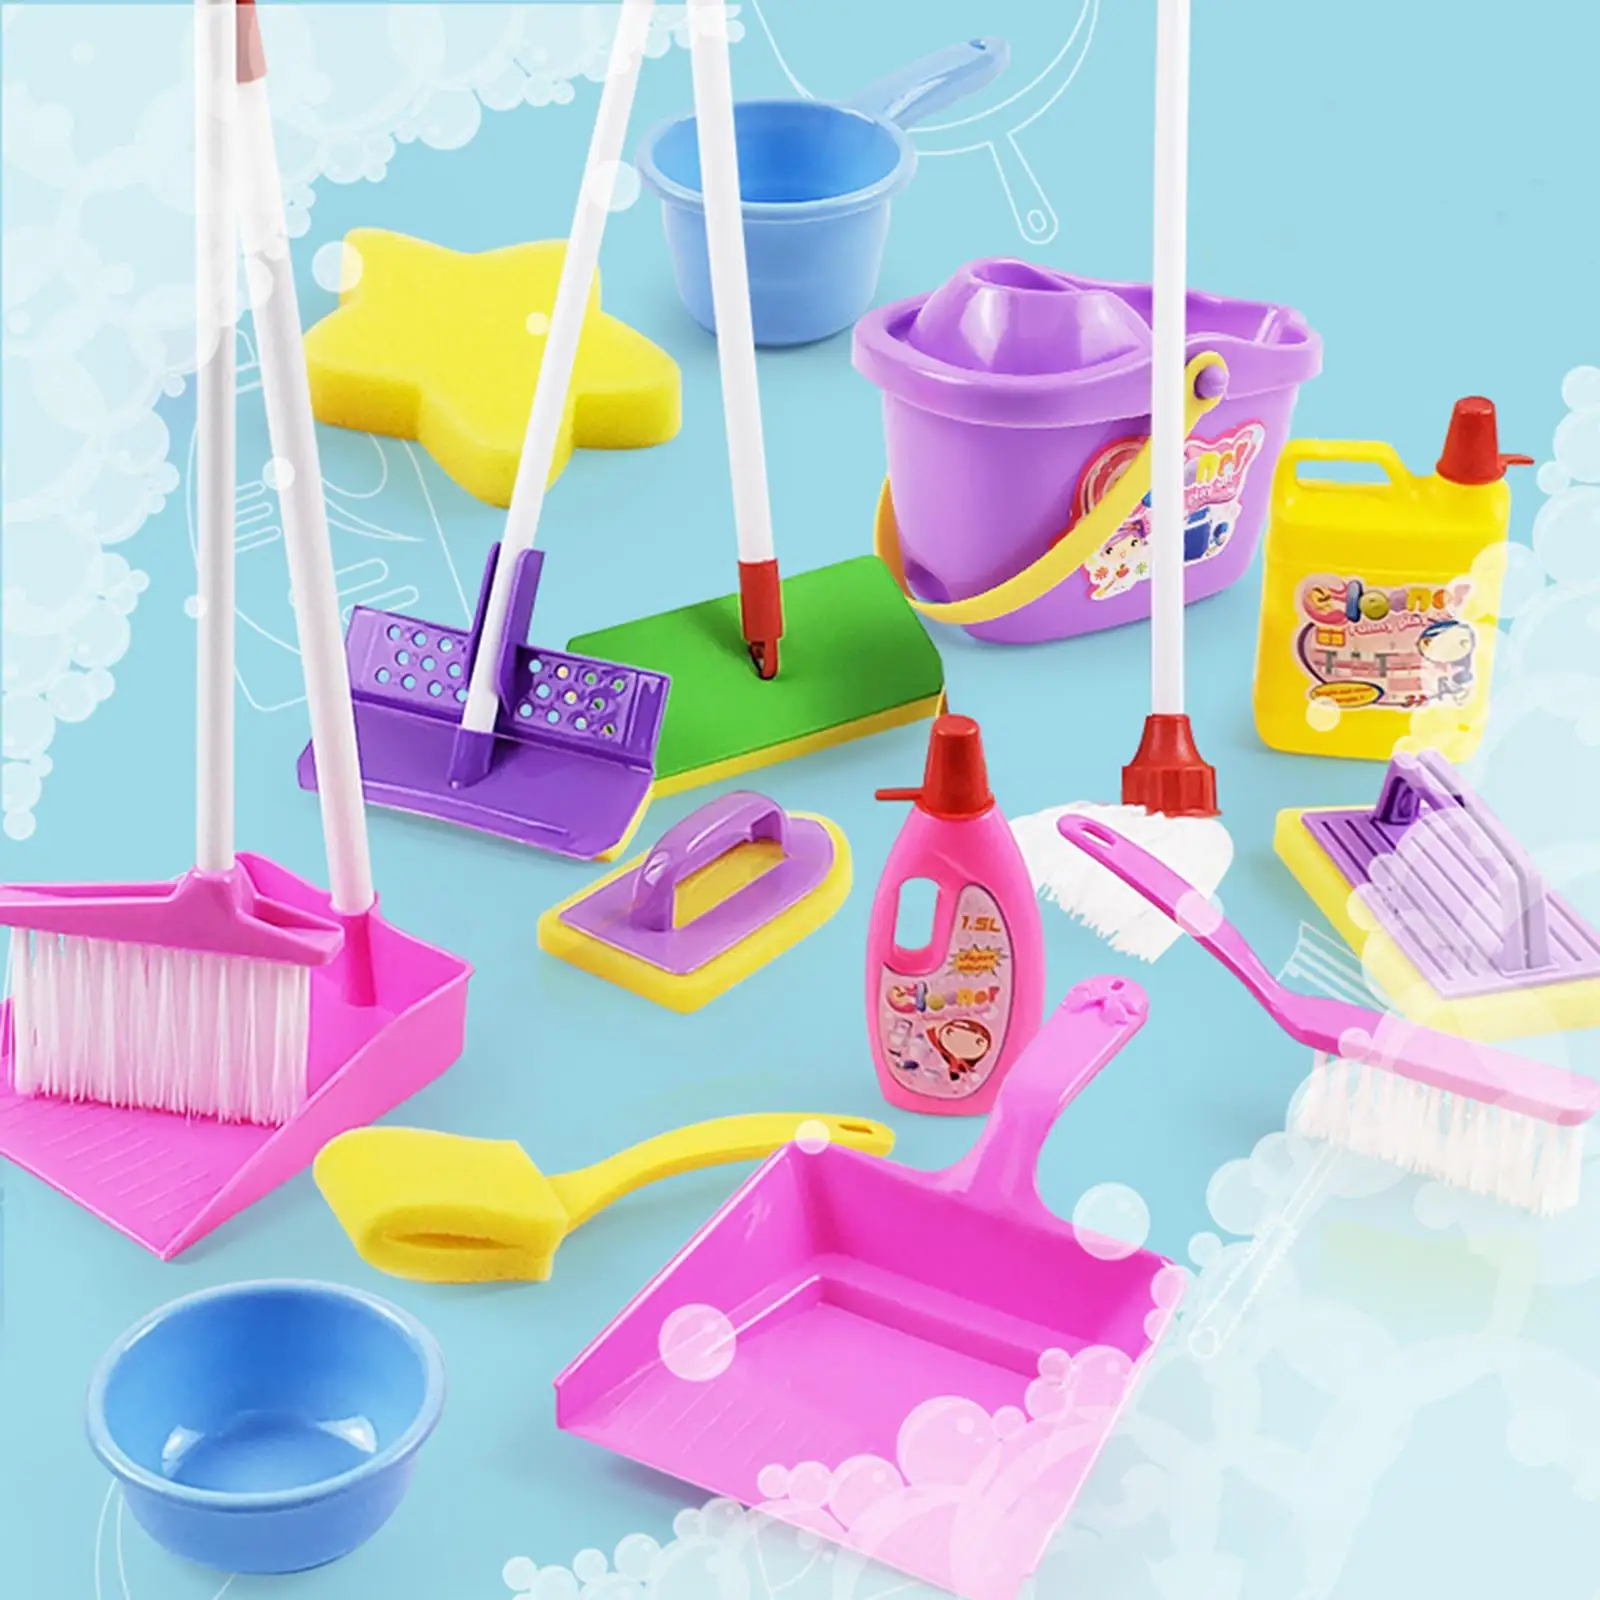 Children Cleaning Toy with Mop Broom Early Educational Toy, Cleaning Tools Pretend Play for Kids Gifts